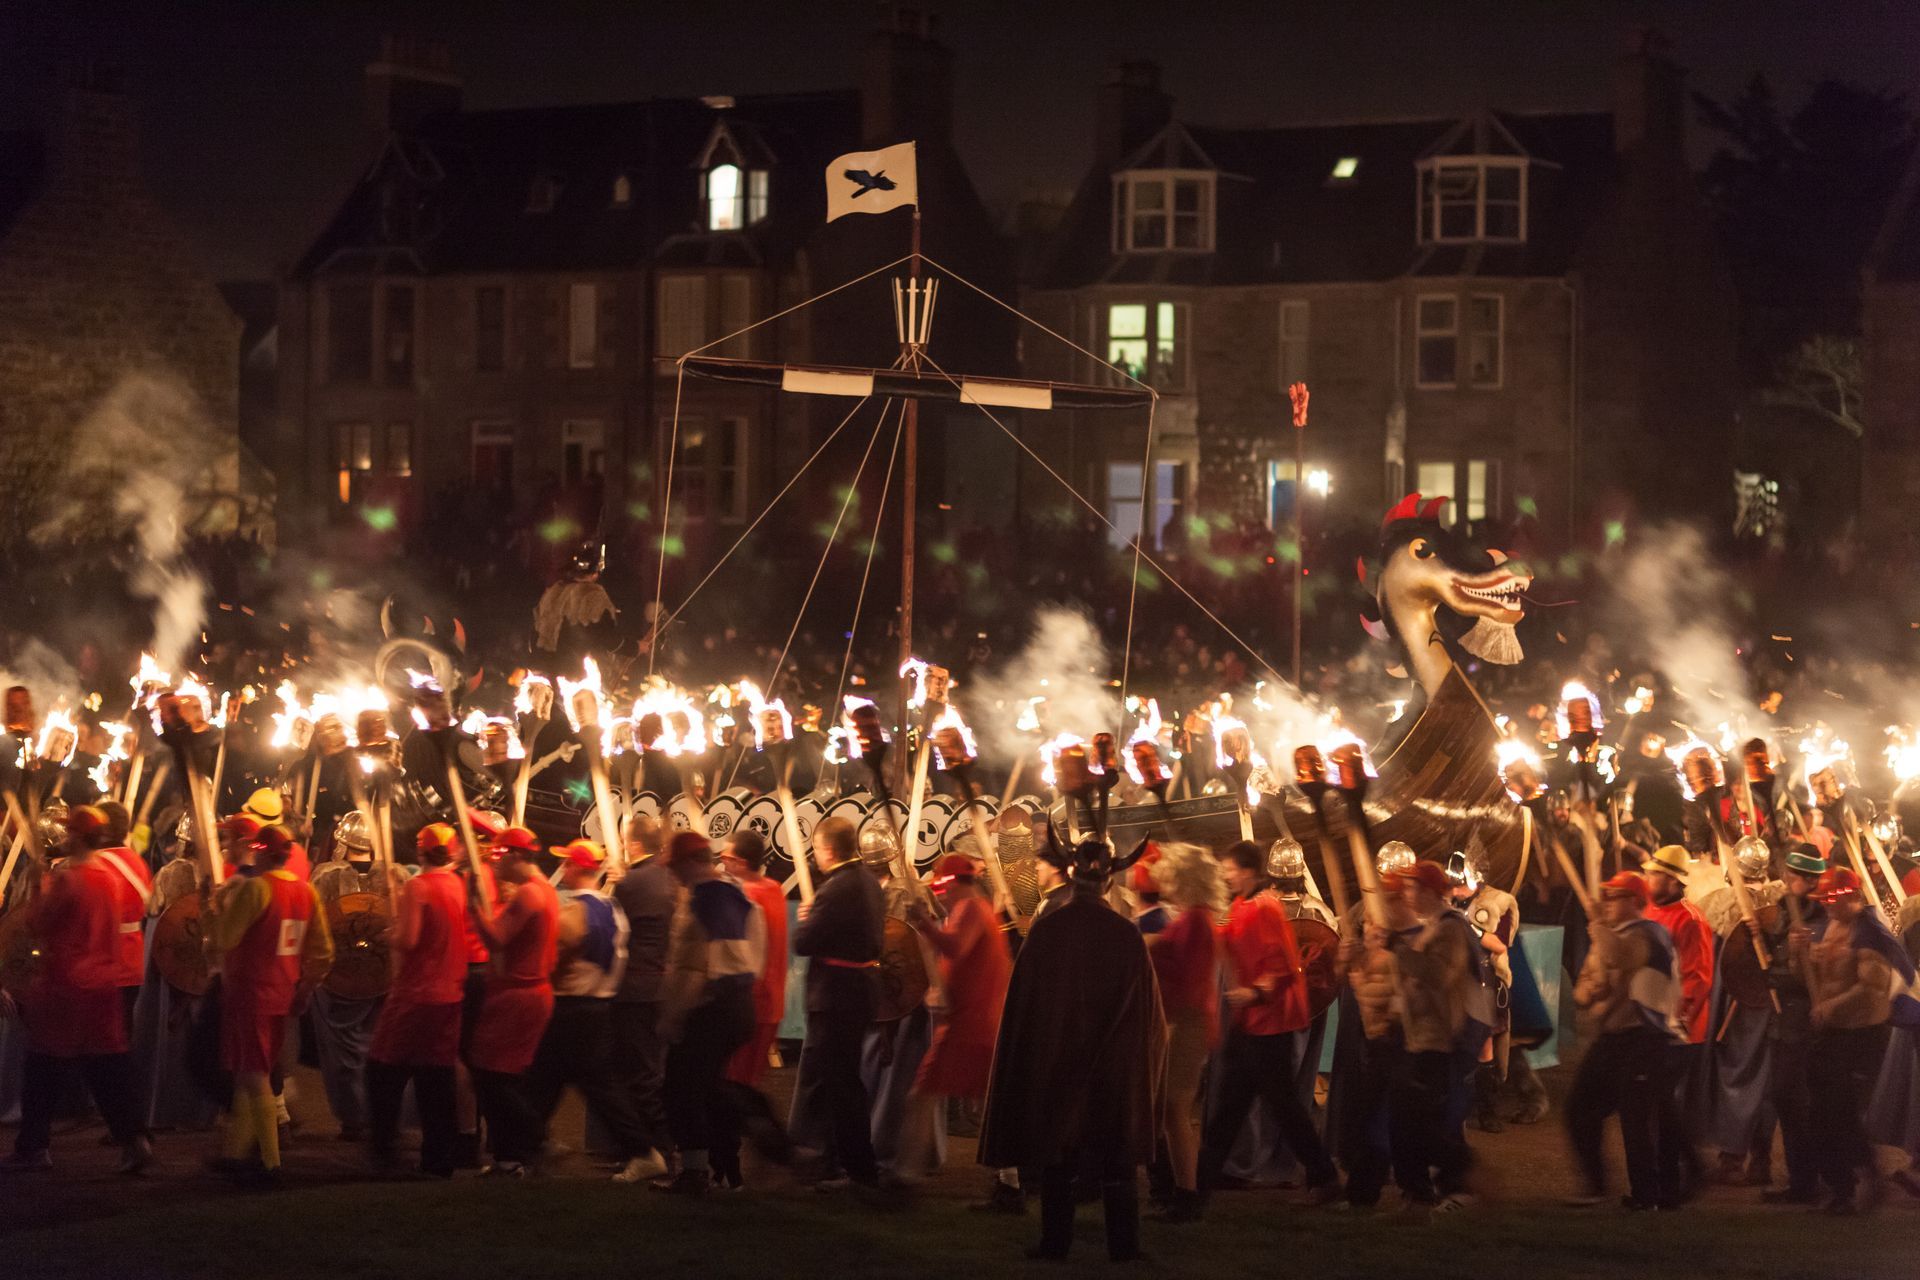 a group of people are holding torches in front of a large viking ship Up Helly Aa festival